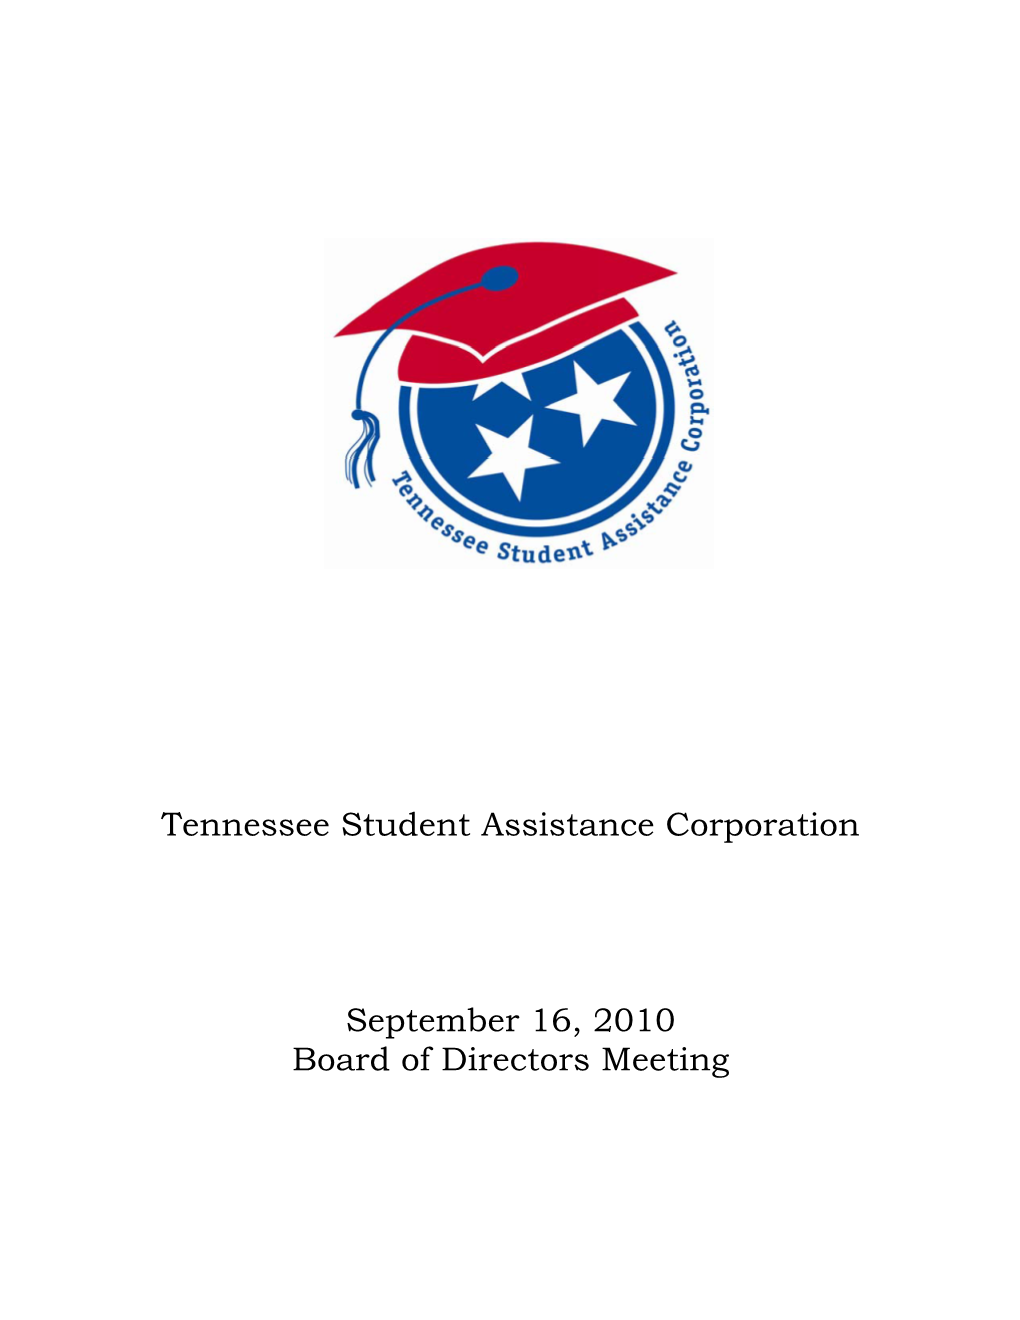 Tennessee Student Assistance Corporation September 16, 2010 Board of Directors Meeting